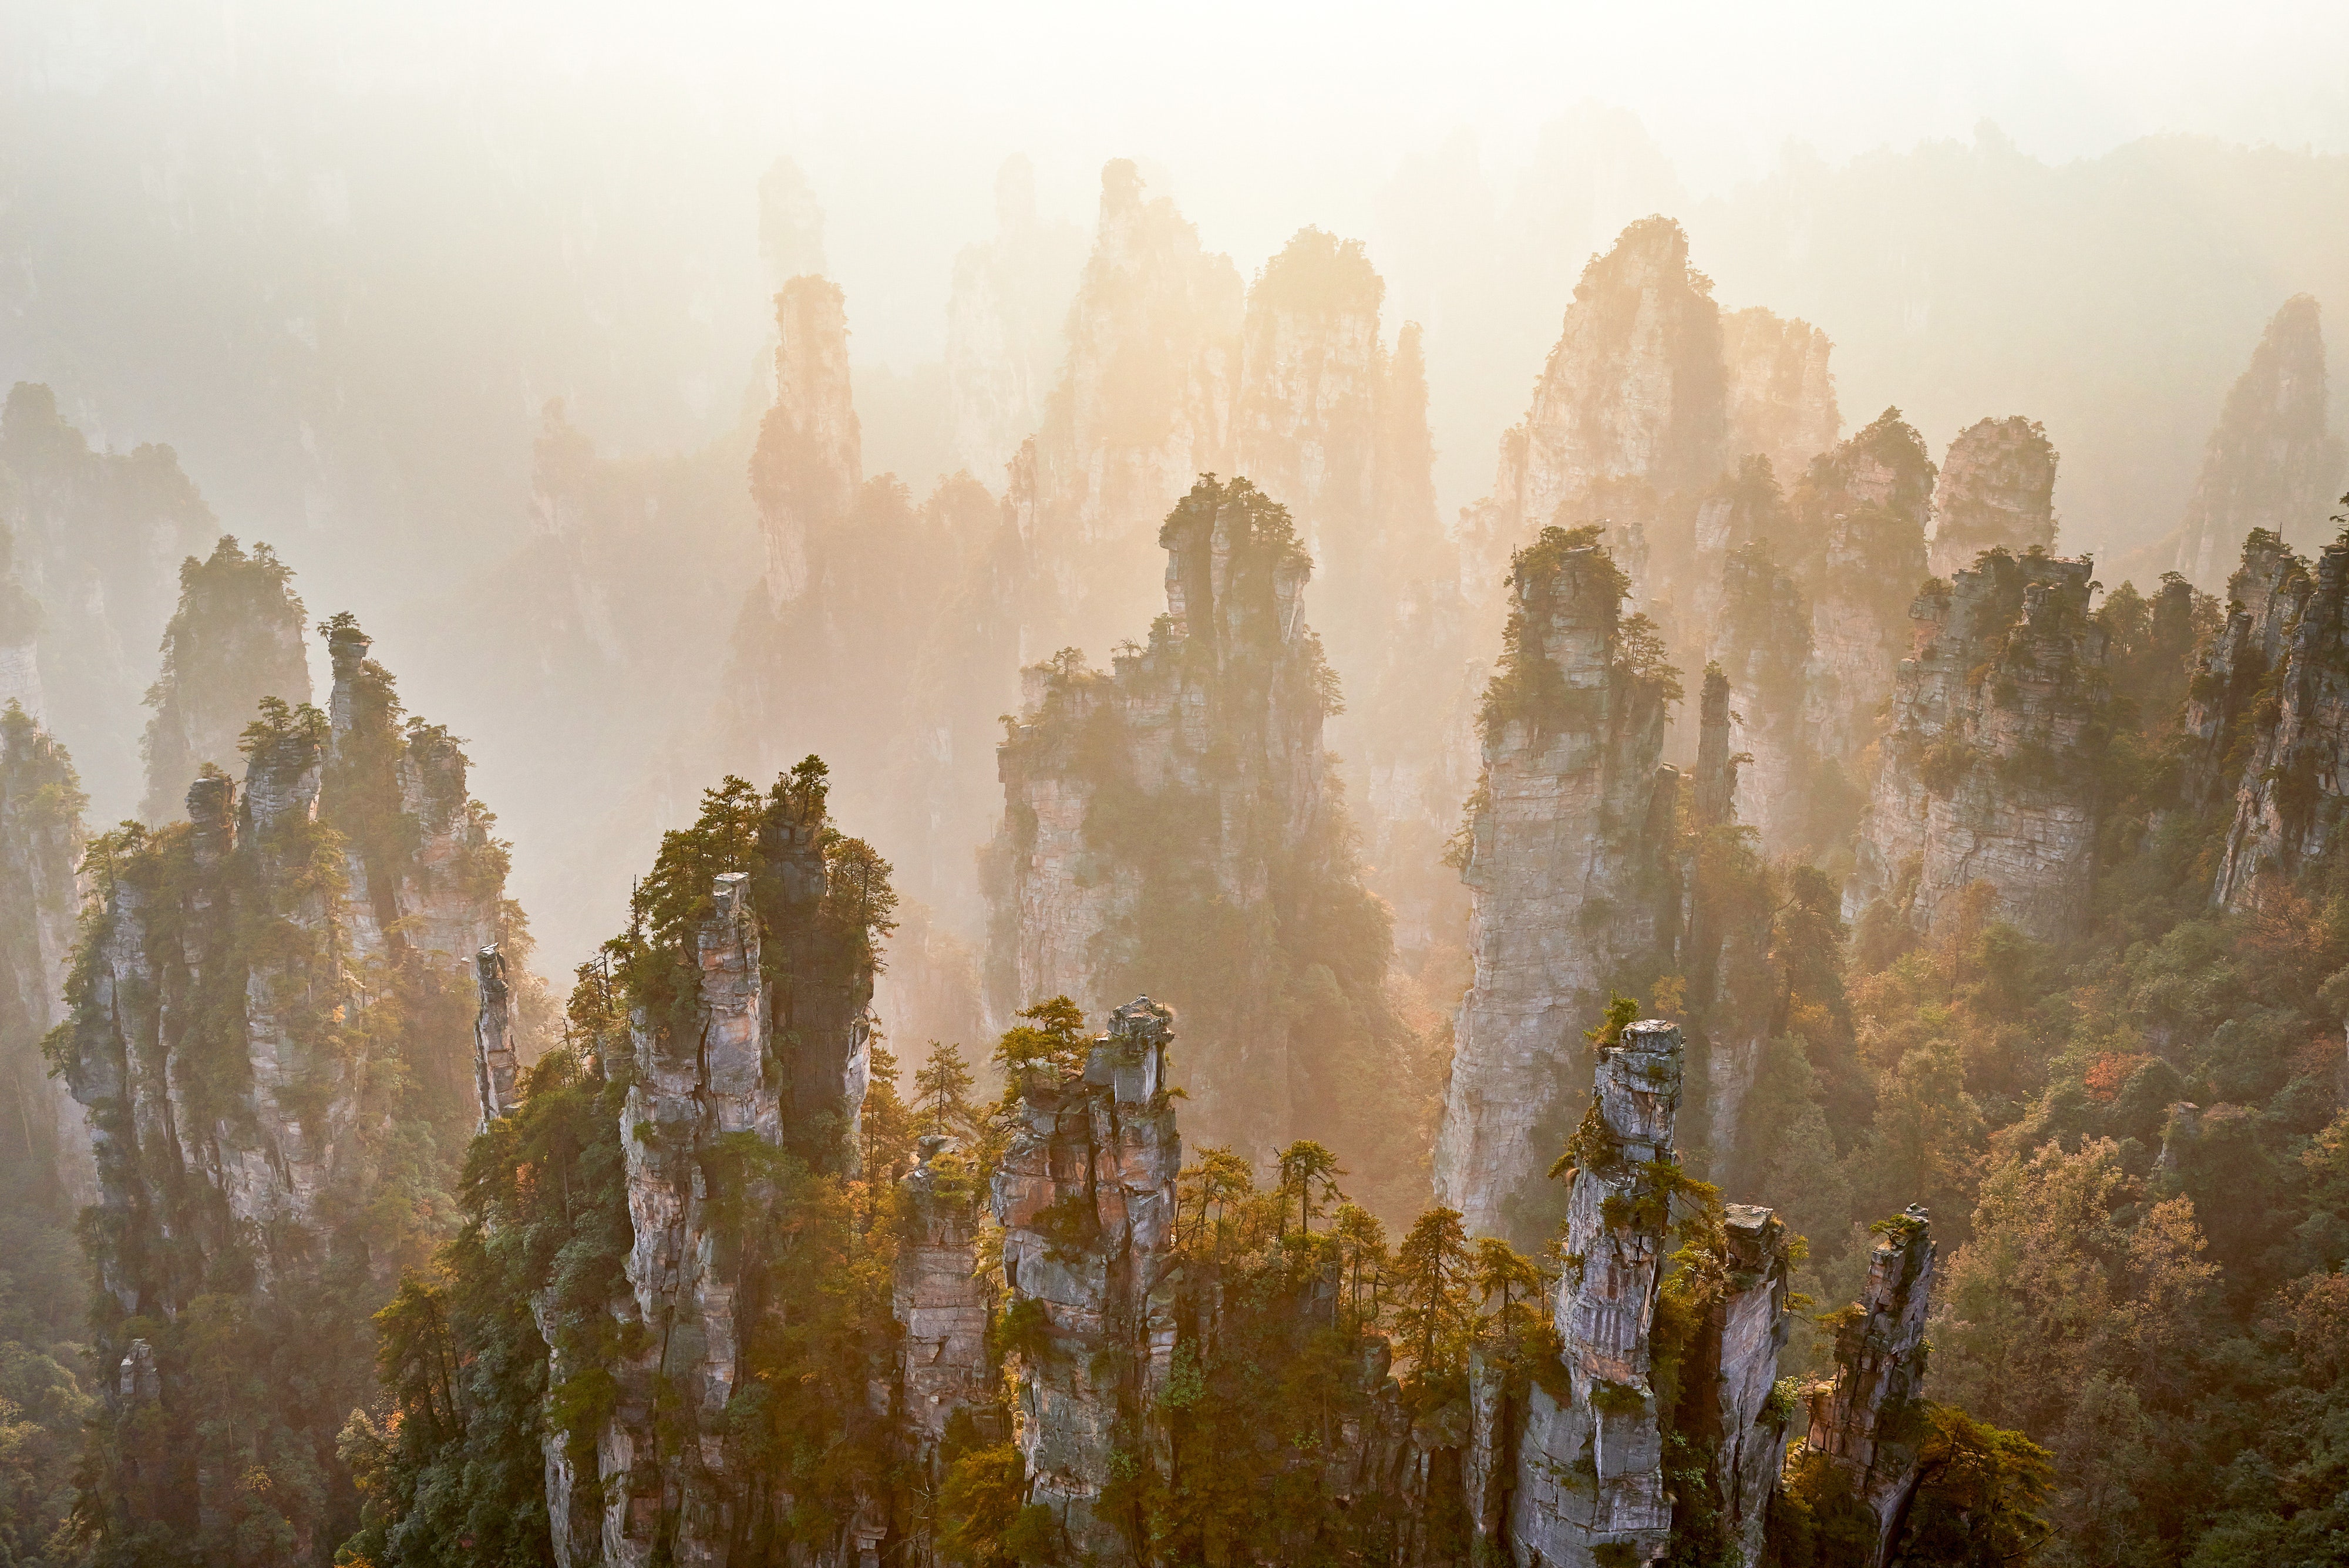 “Scenic” might be an understatement here: This 100-square-mile attraction in China’s Hunan Province contains thousands of sandstone pillars that are nature’s version of skyscrapers—some even stretch taller than the <a href="https://www.cntraveler.com/activities/new-york/empire-state-building?mbid=synd_msn_rss&utm_source=msn&utm_medium=syndication">Empire State Building’s</a> midpoint.<p>Sign up to receive the latest news, expert tips, and inspiration on all things travel</p><a href="https://www.cntraveler.com/newsletter/the-daily?sourceCode=msnsend">Inspire Me</a>